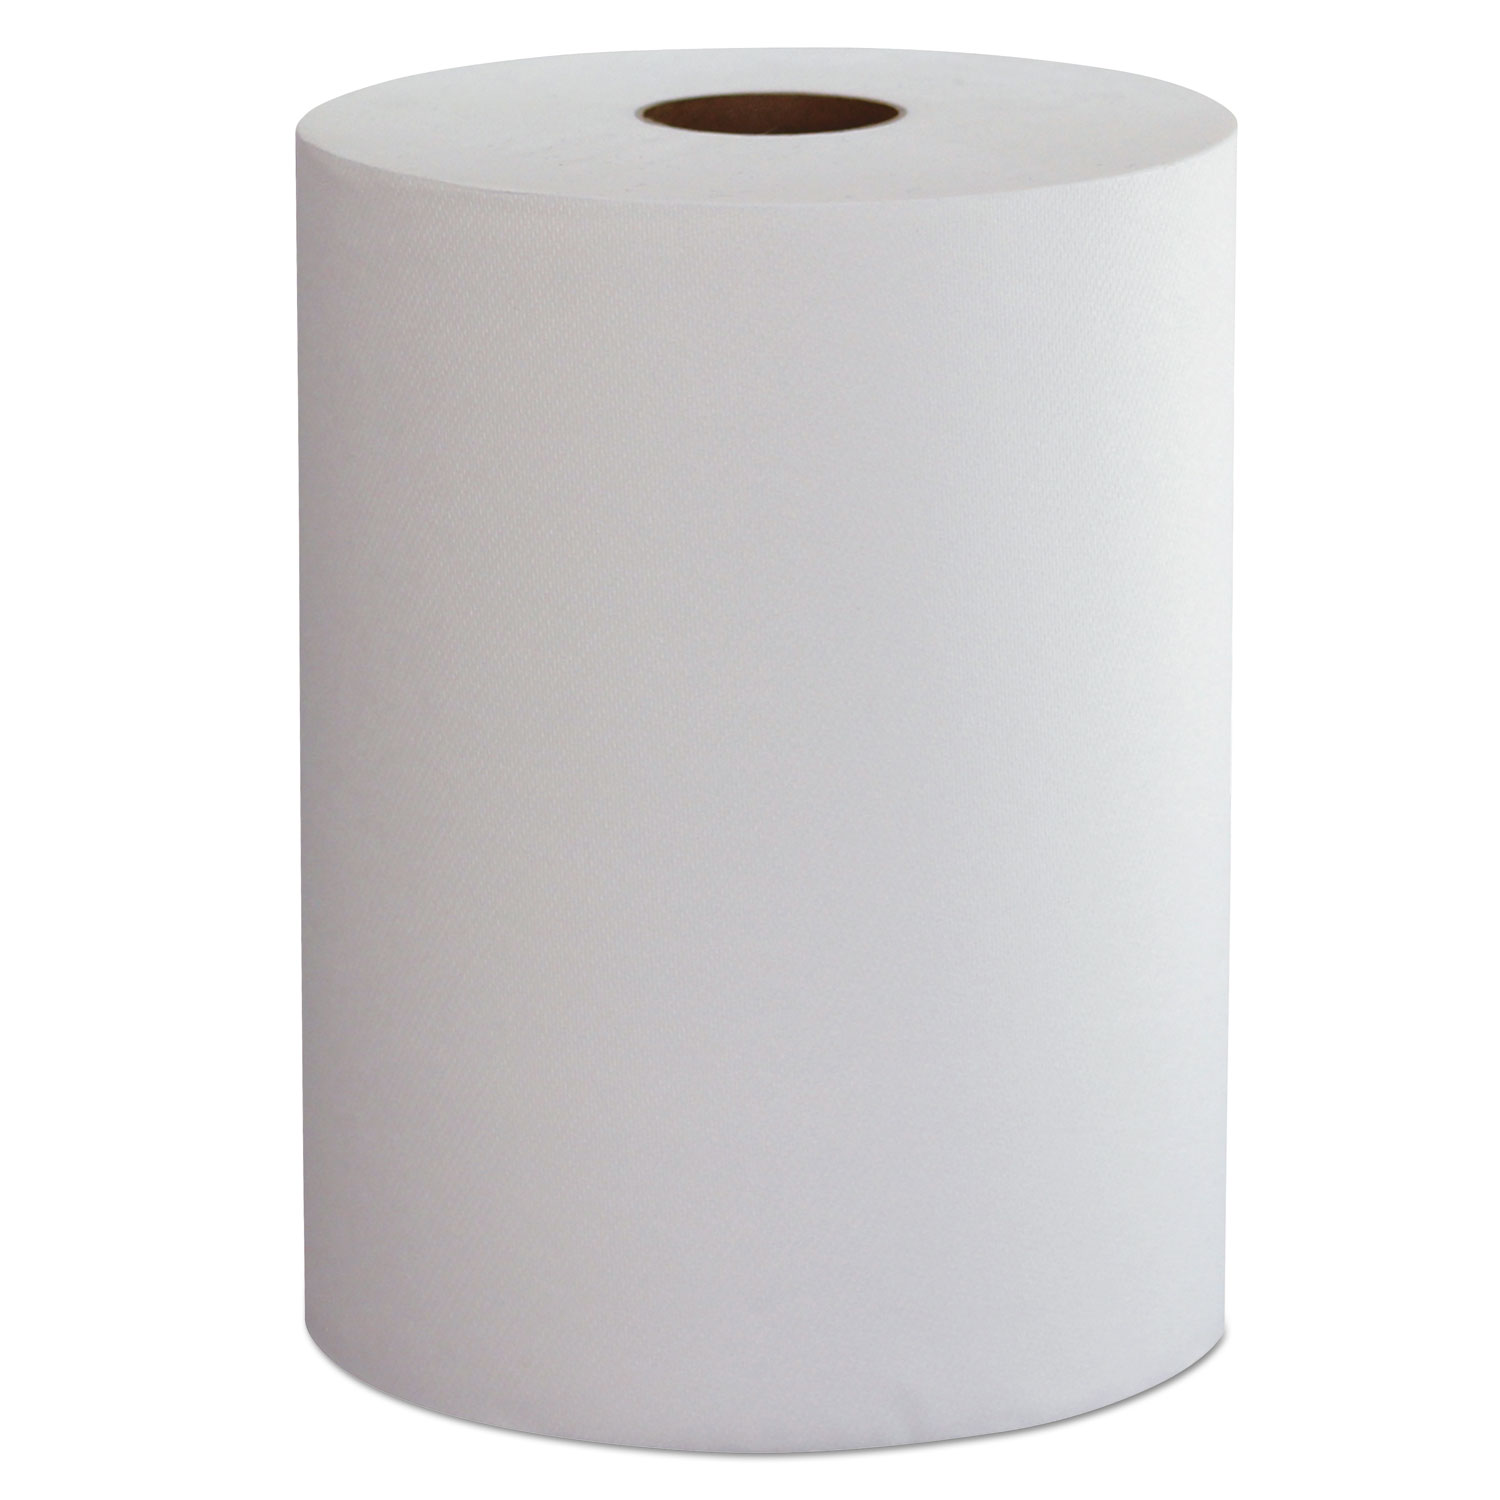 Morcon Hardwound Roll Towels - 1-Ply, 10" x 800', White, 6/Case